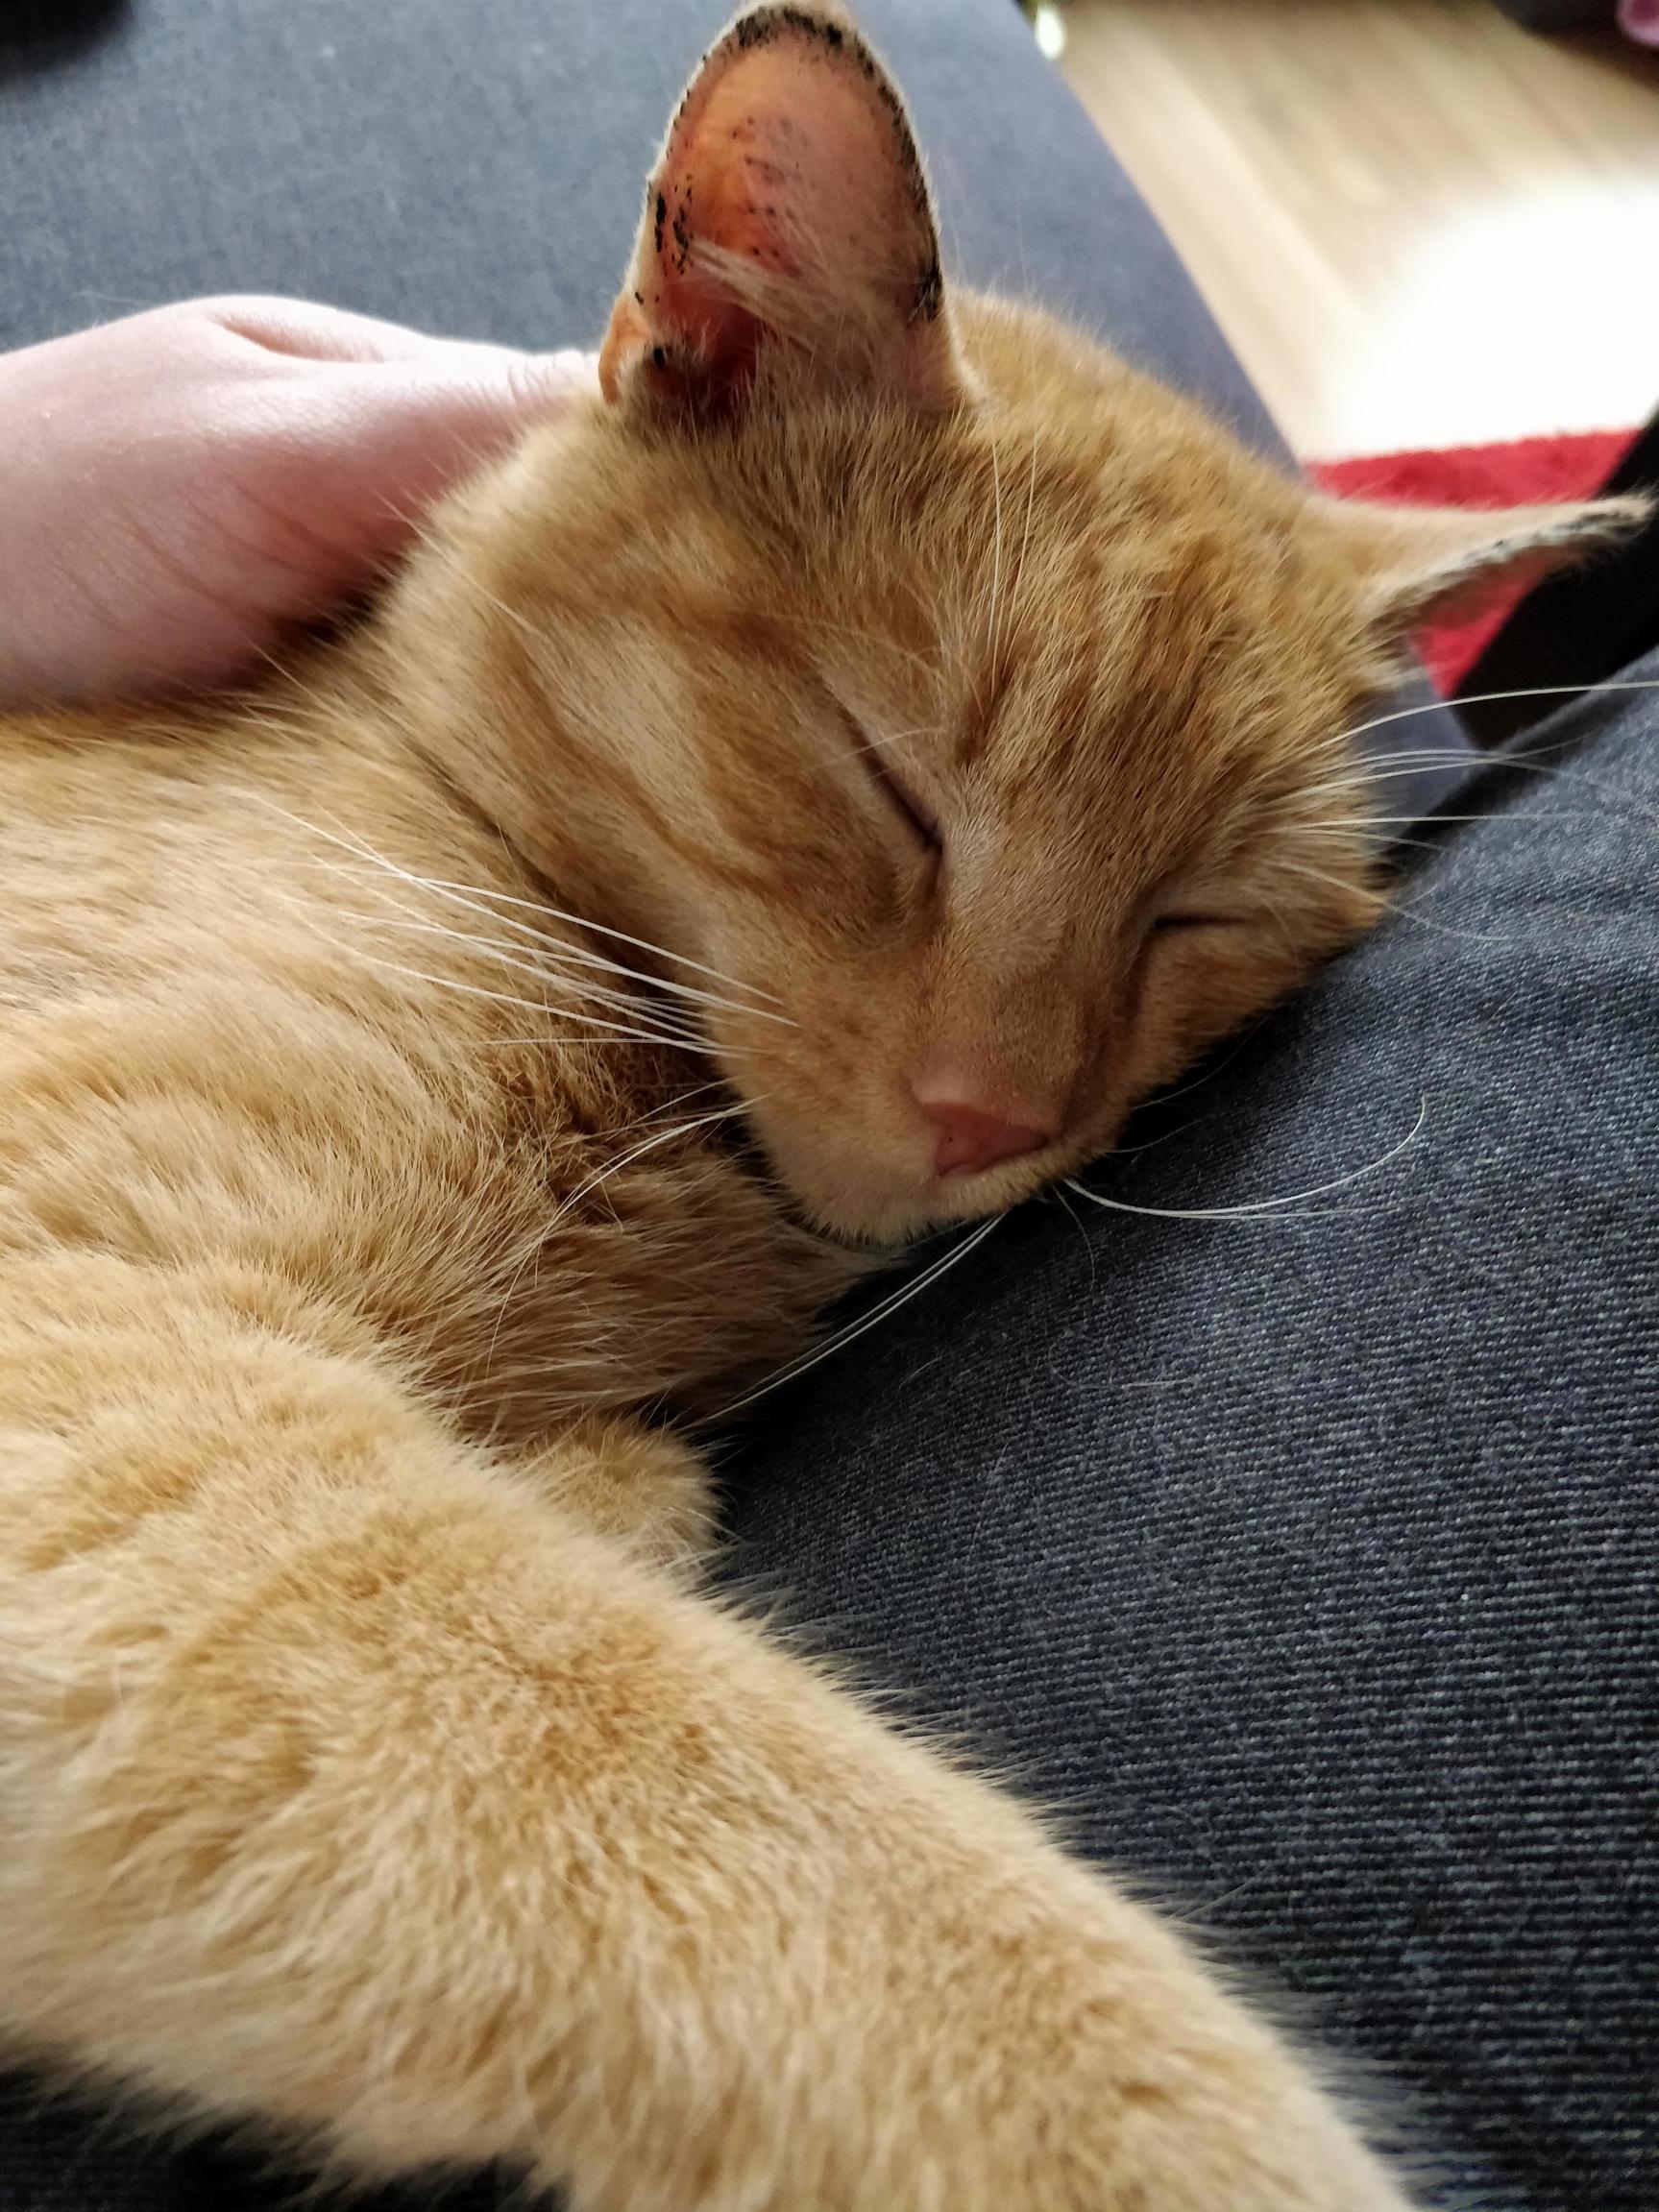 Took this fella out of the local animal shelter two days ago. i think he likes his new place.